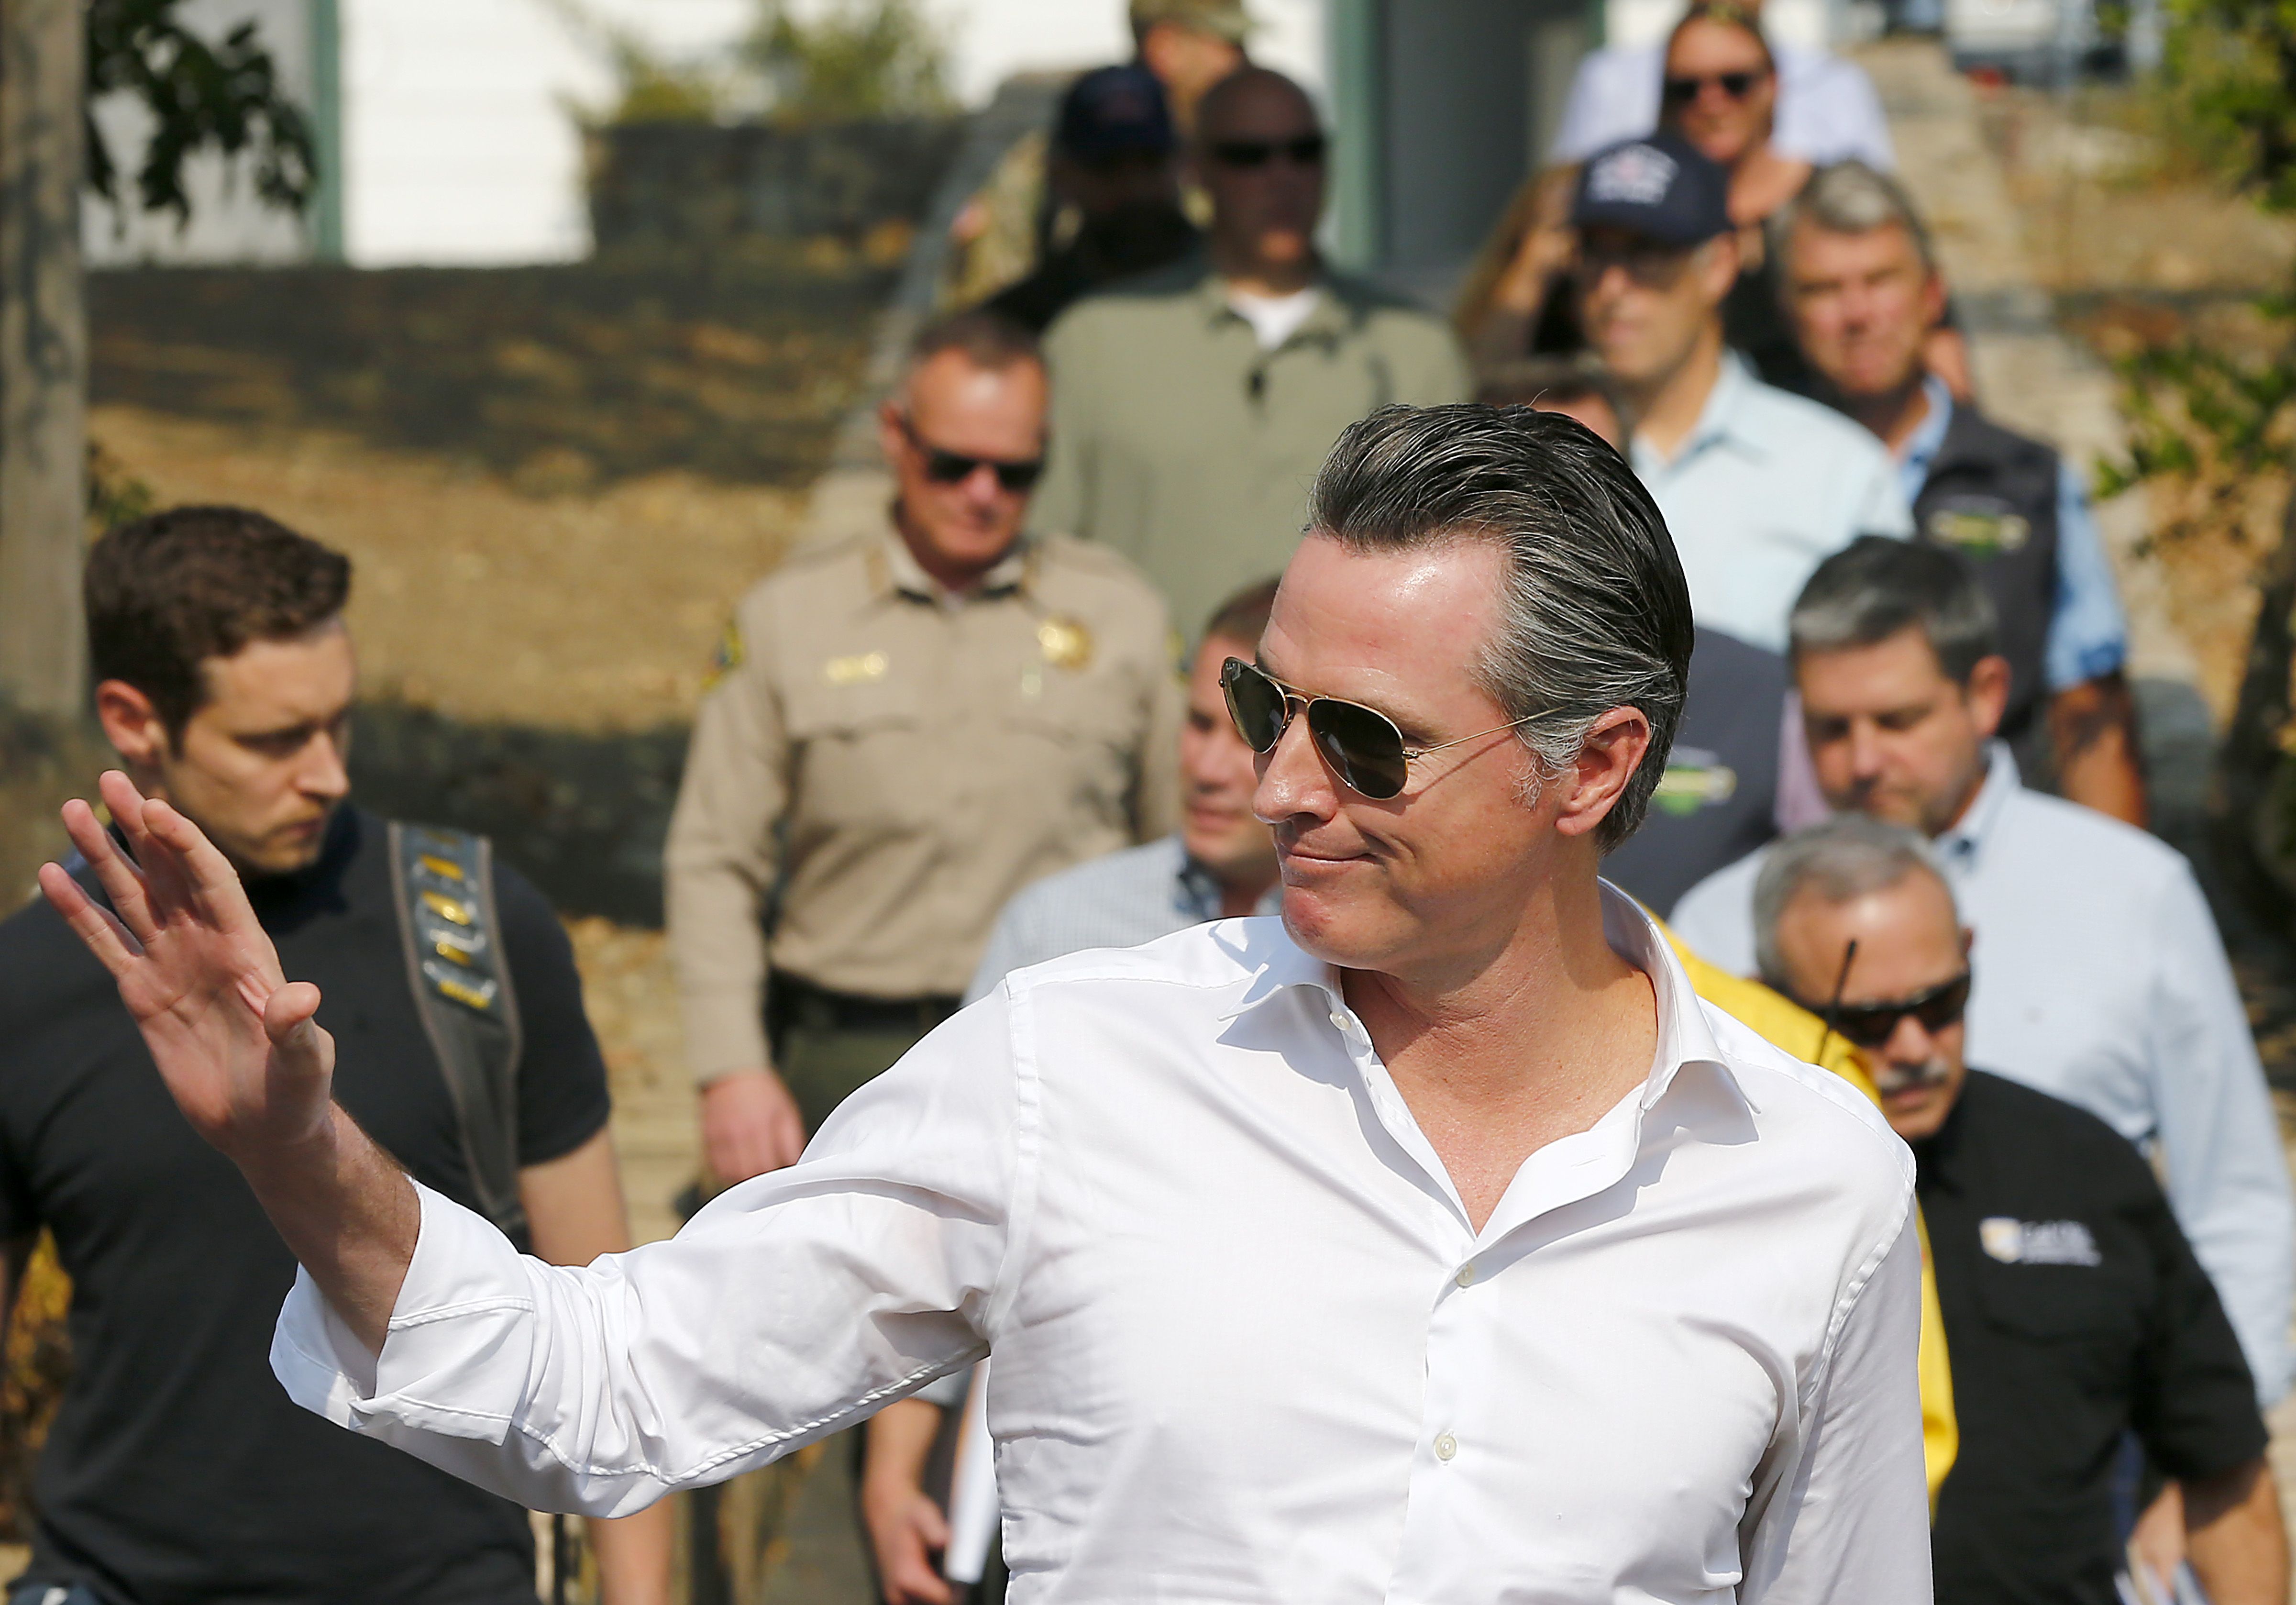 Has any California governor dealt with more disasters at once than Gavin Newsom? Not likely